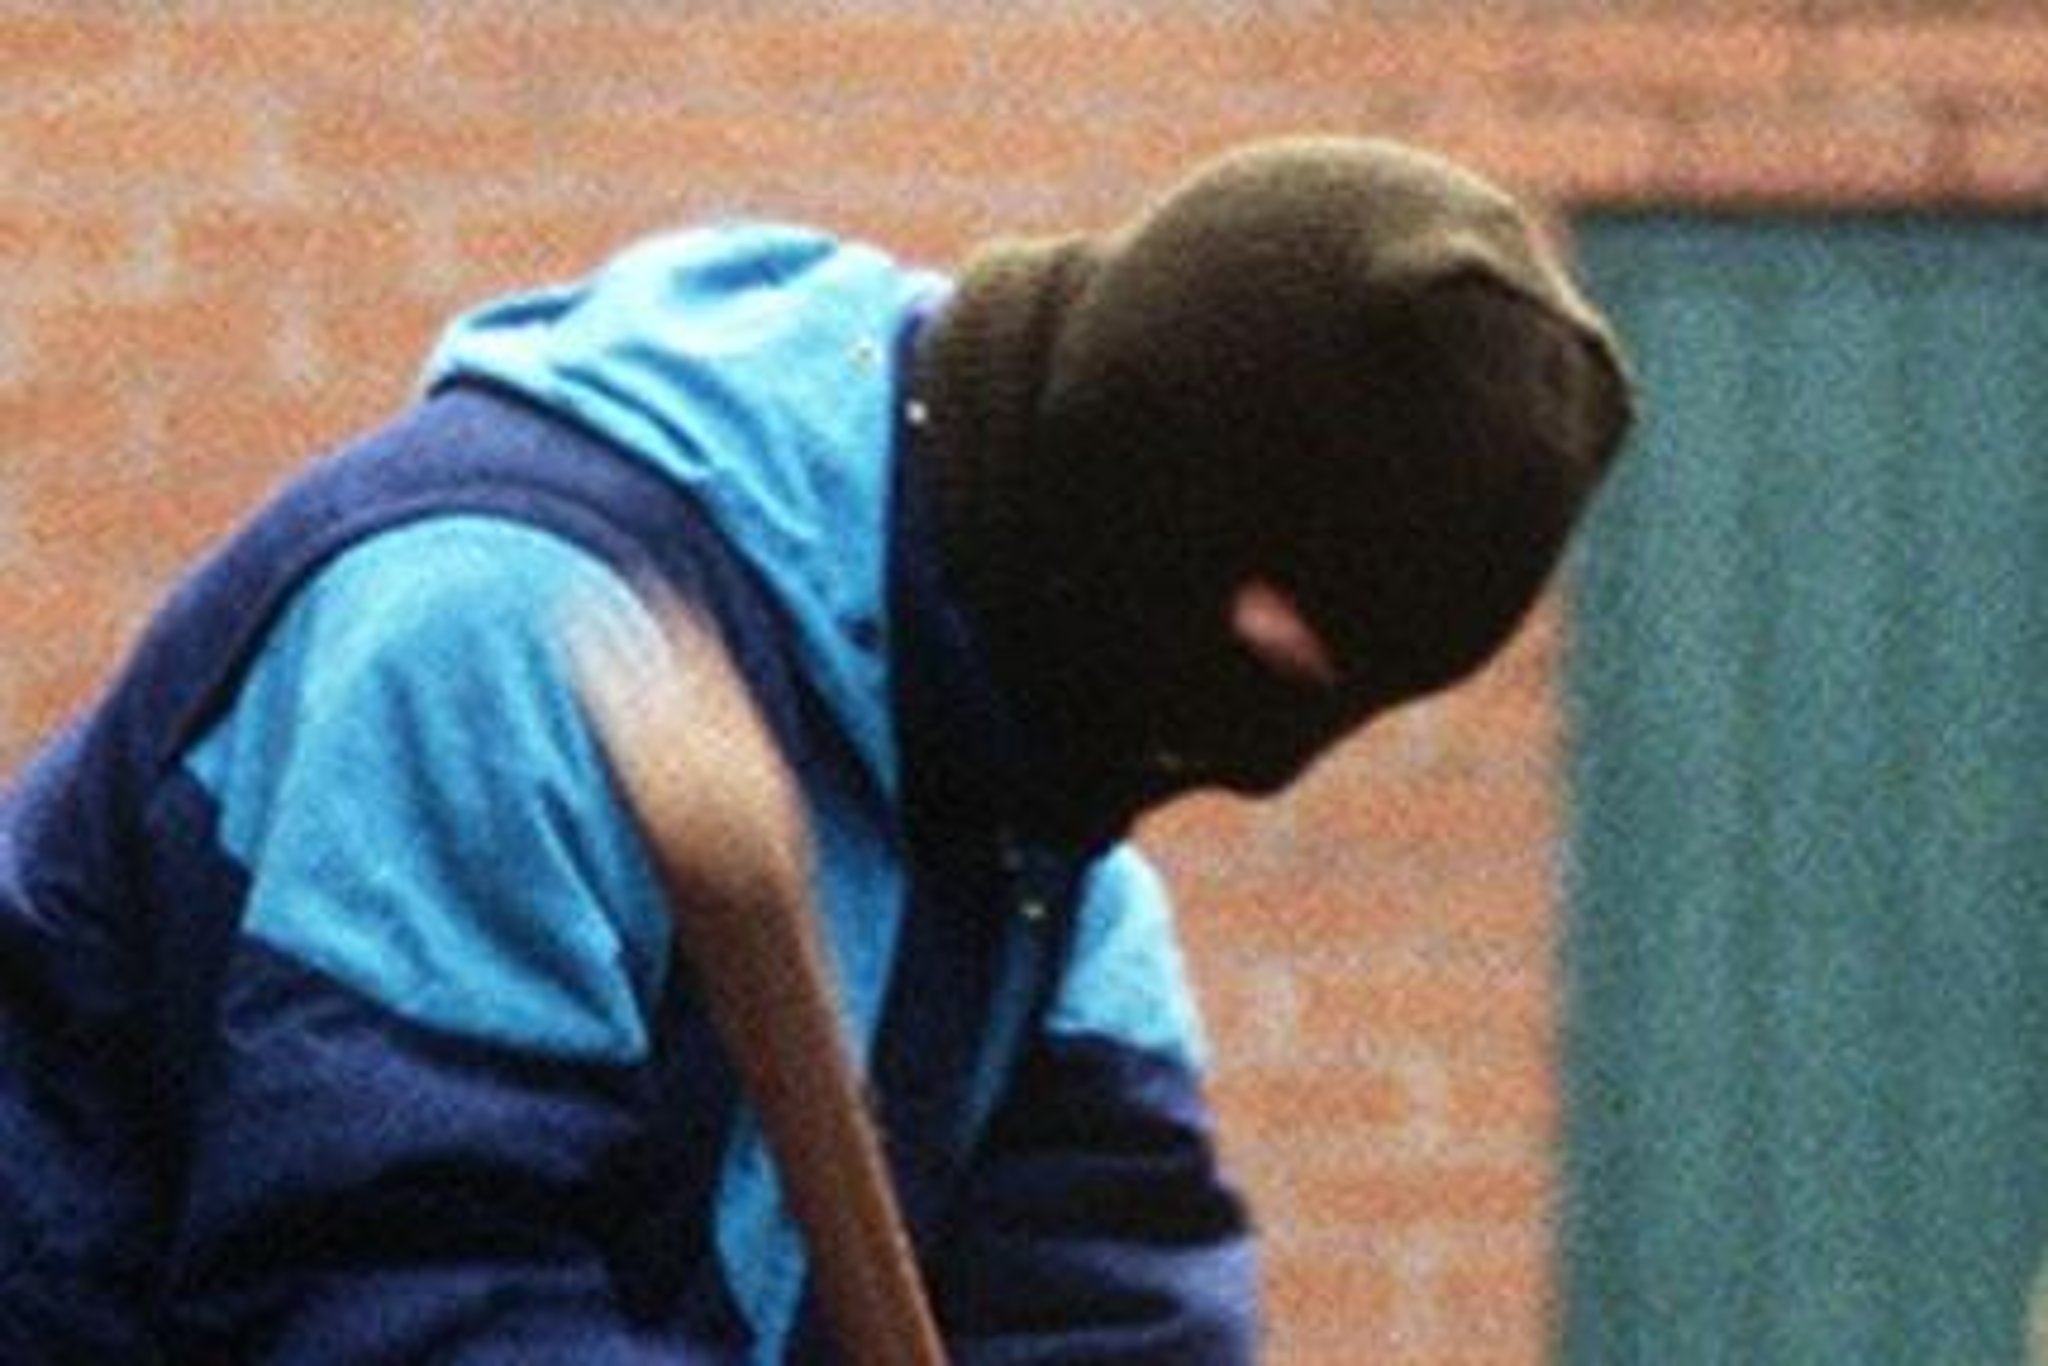 Woman left shaken after five balaclava-clad men carry out aggravated burglary